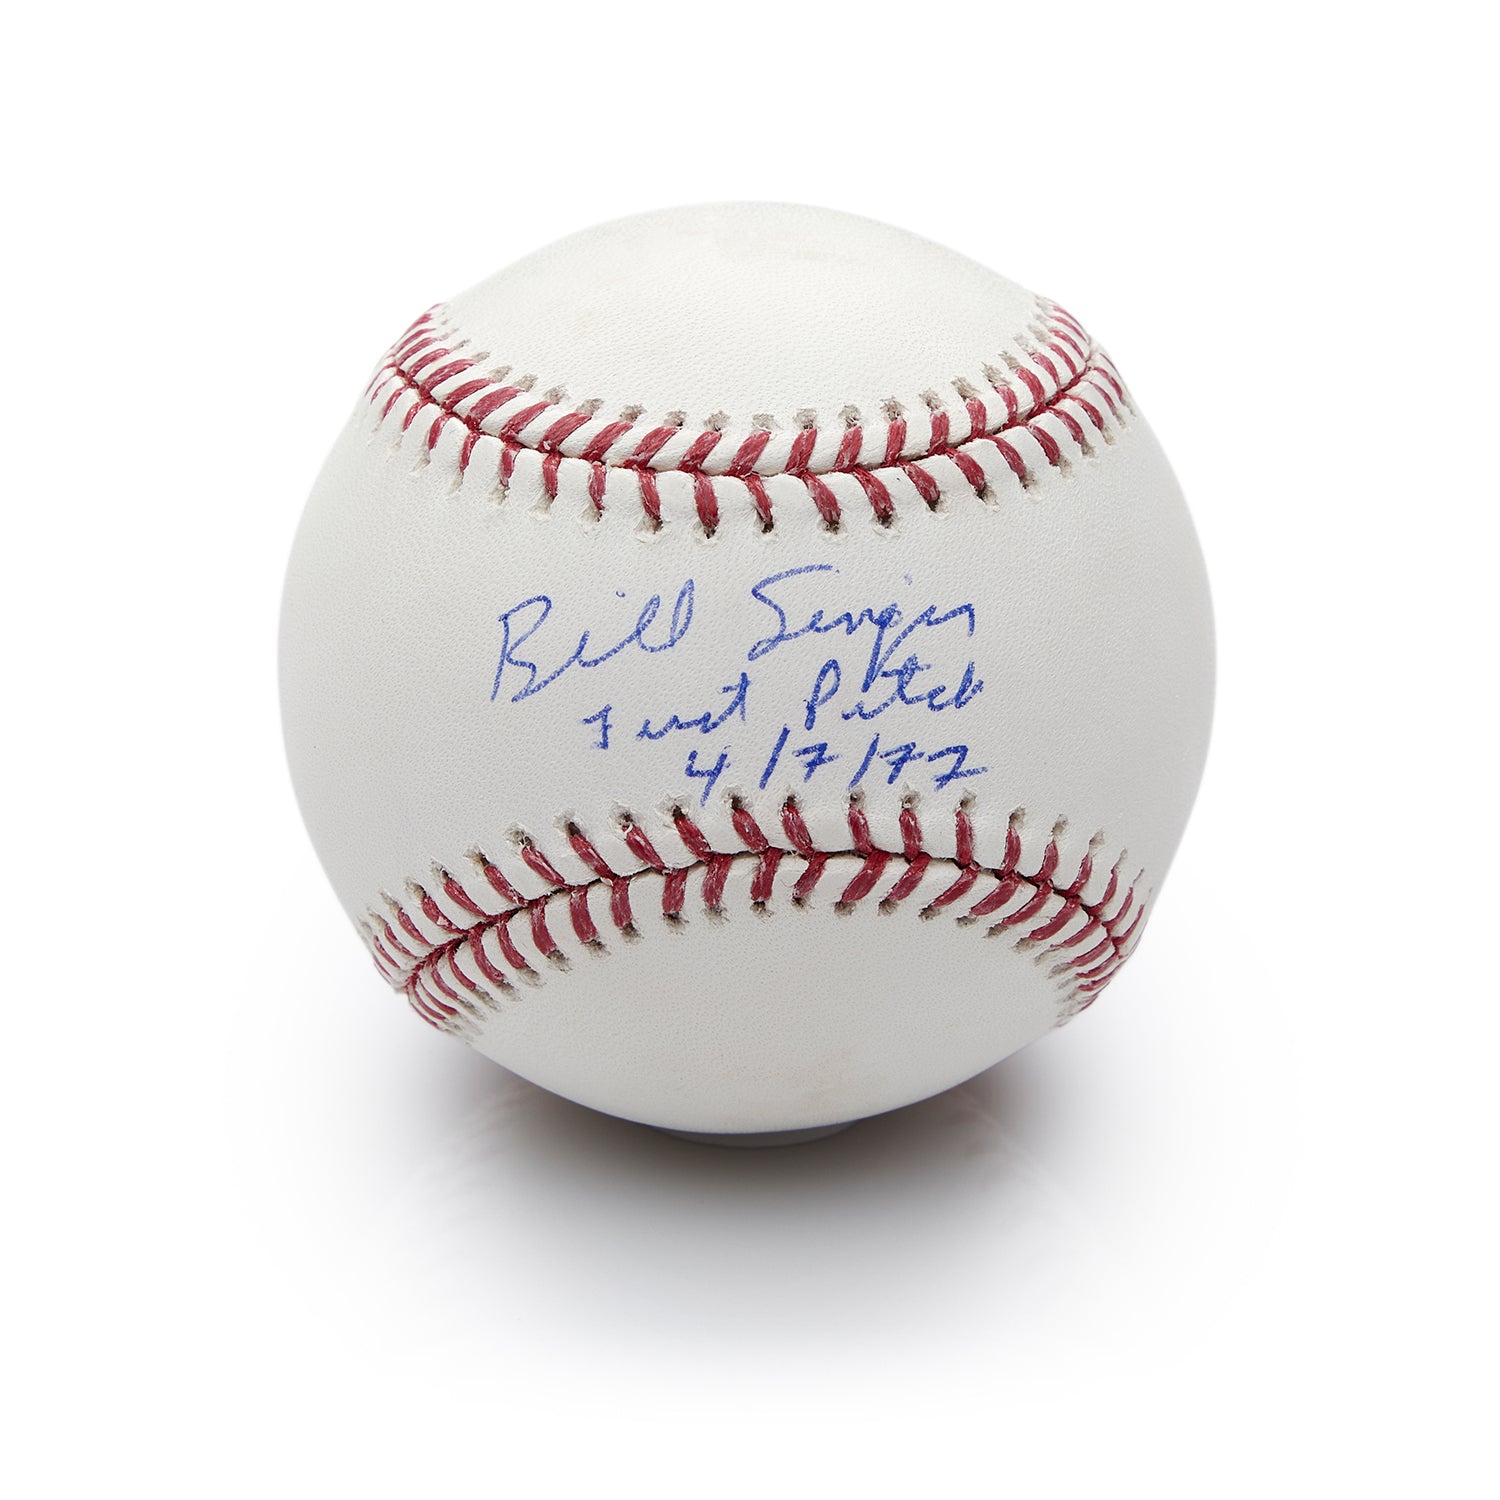 Bill Singer Signed Official MLB Major League Baseball with 1st Pitch Note